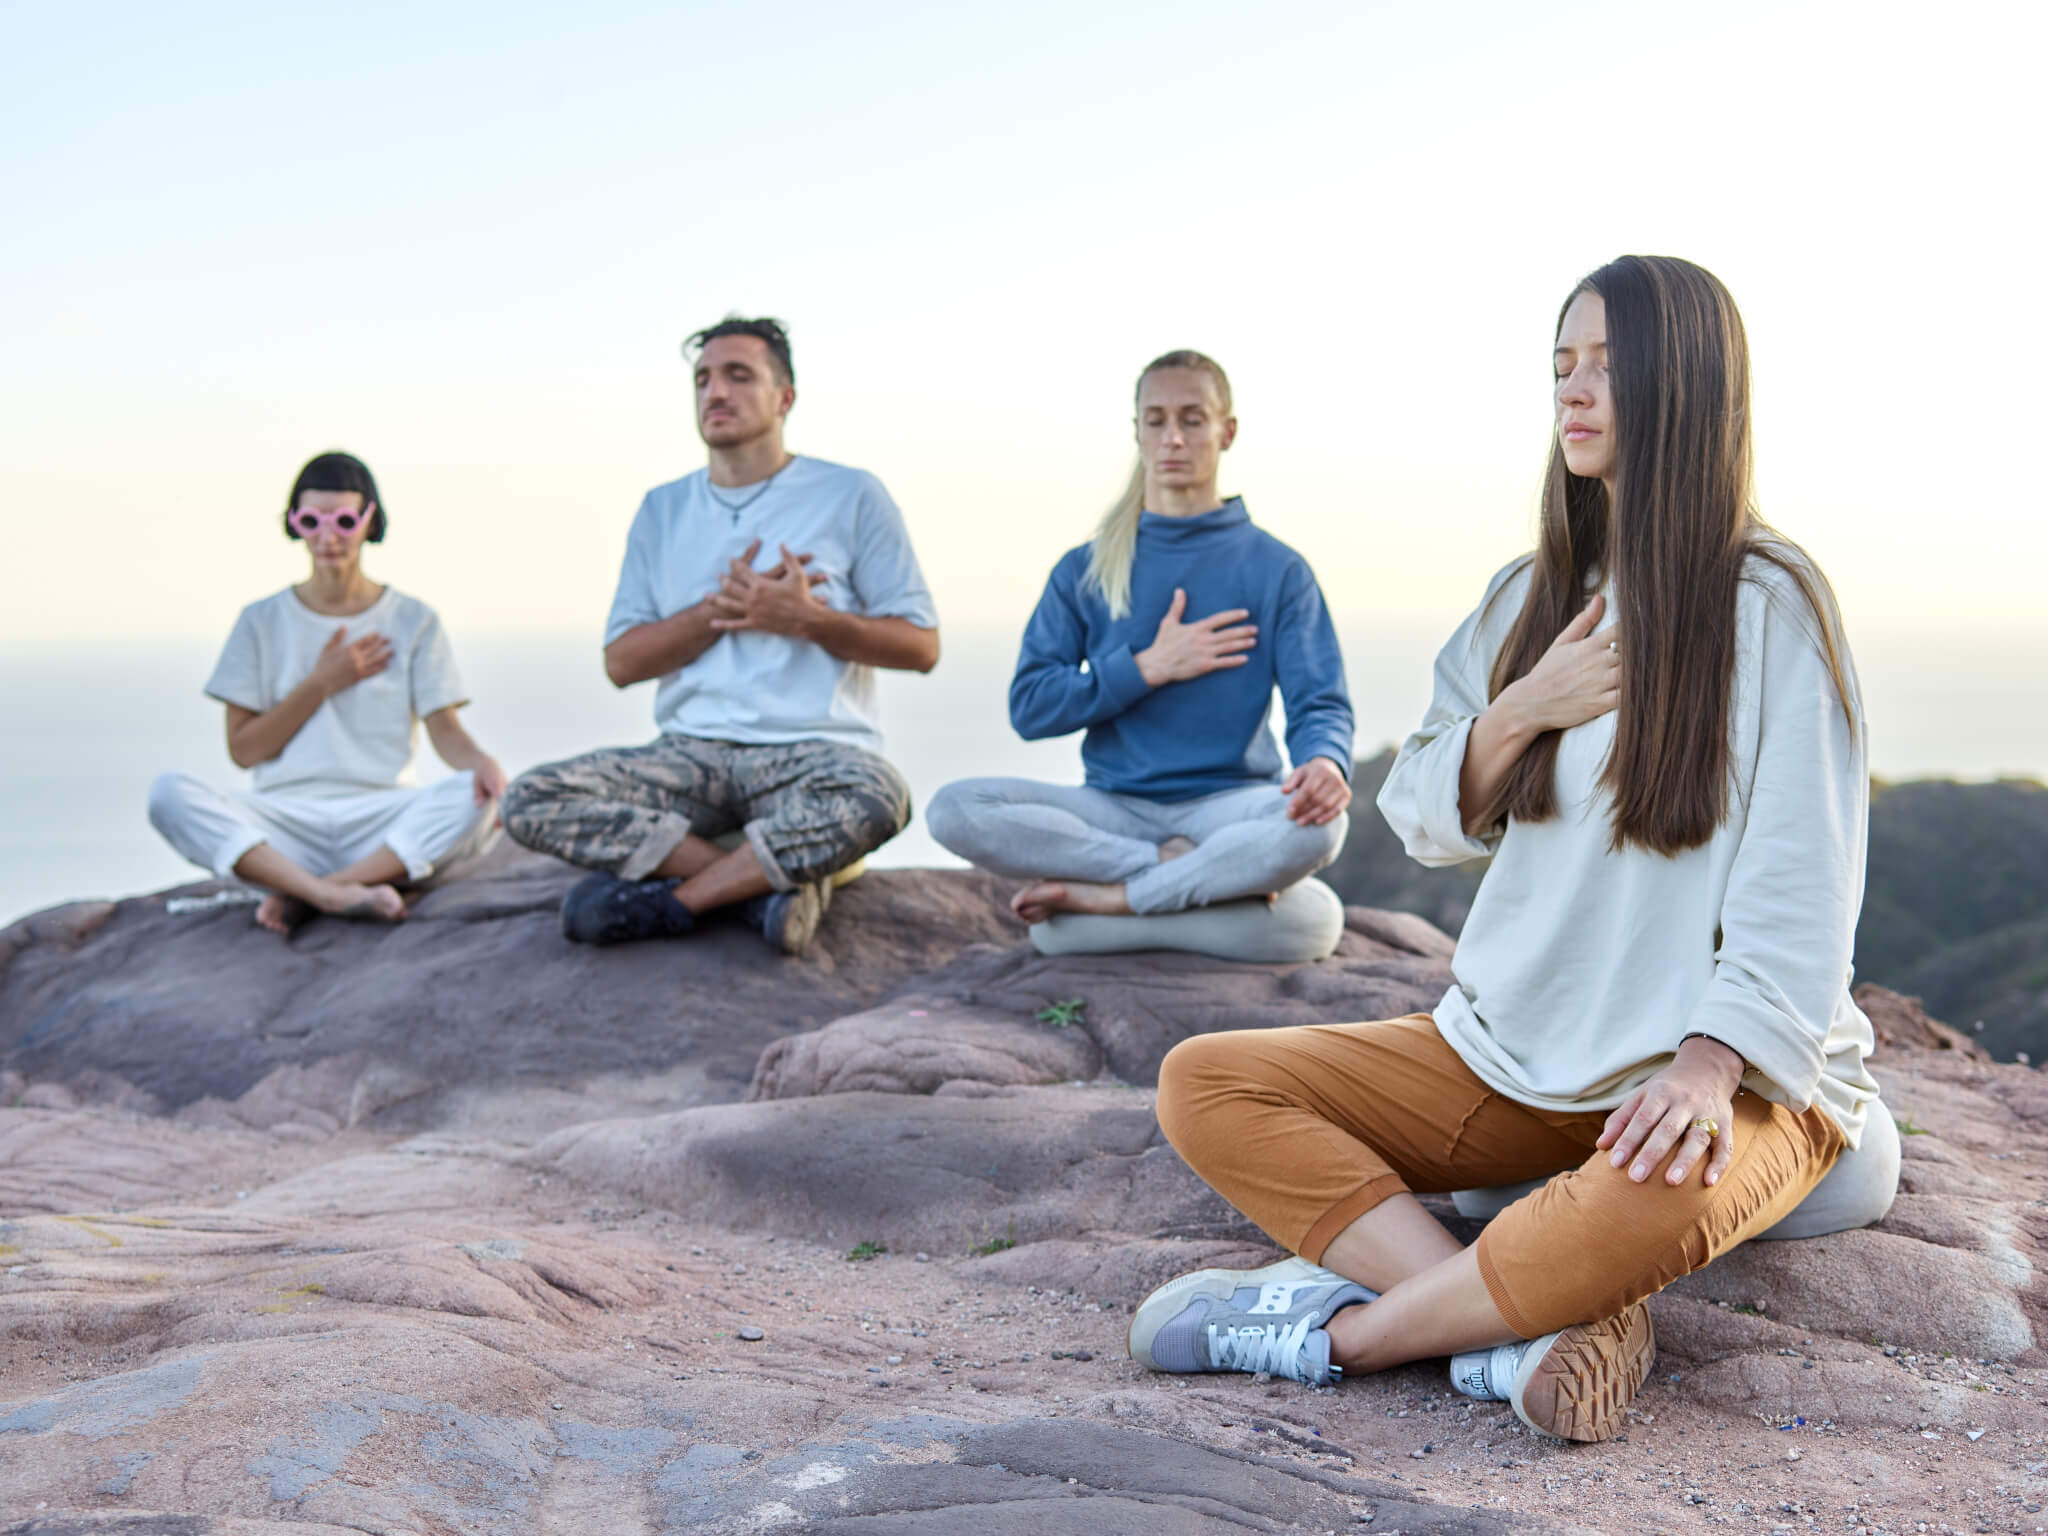 Is group meditation the answer for lowering America's stress?